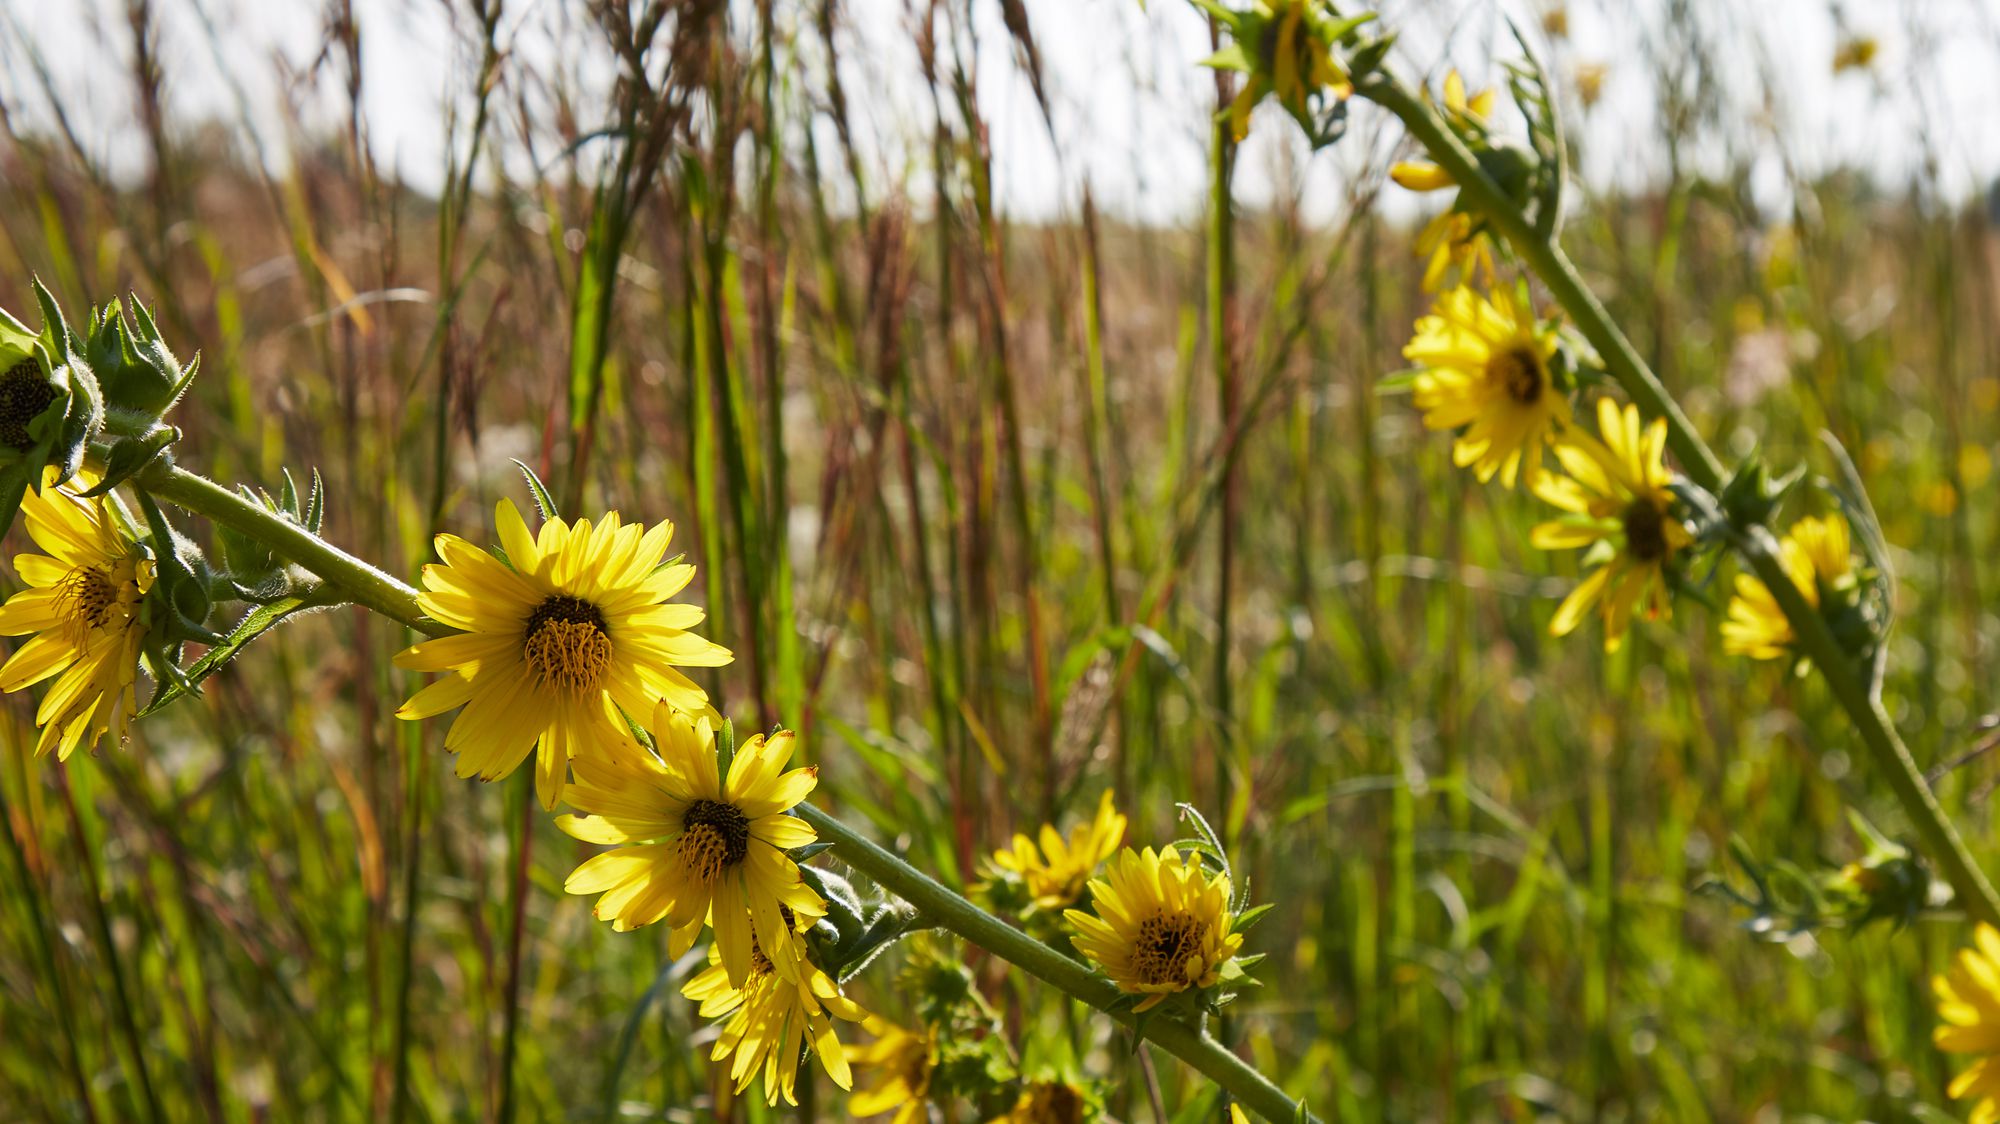 Flowers in a natural area in Will County.